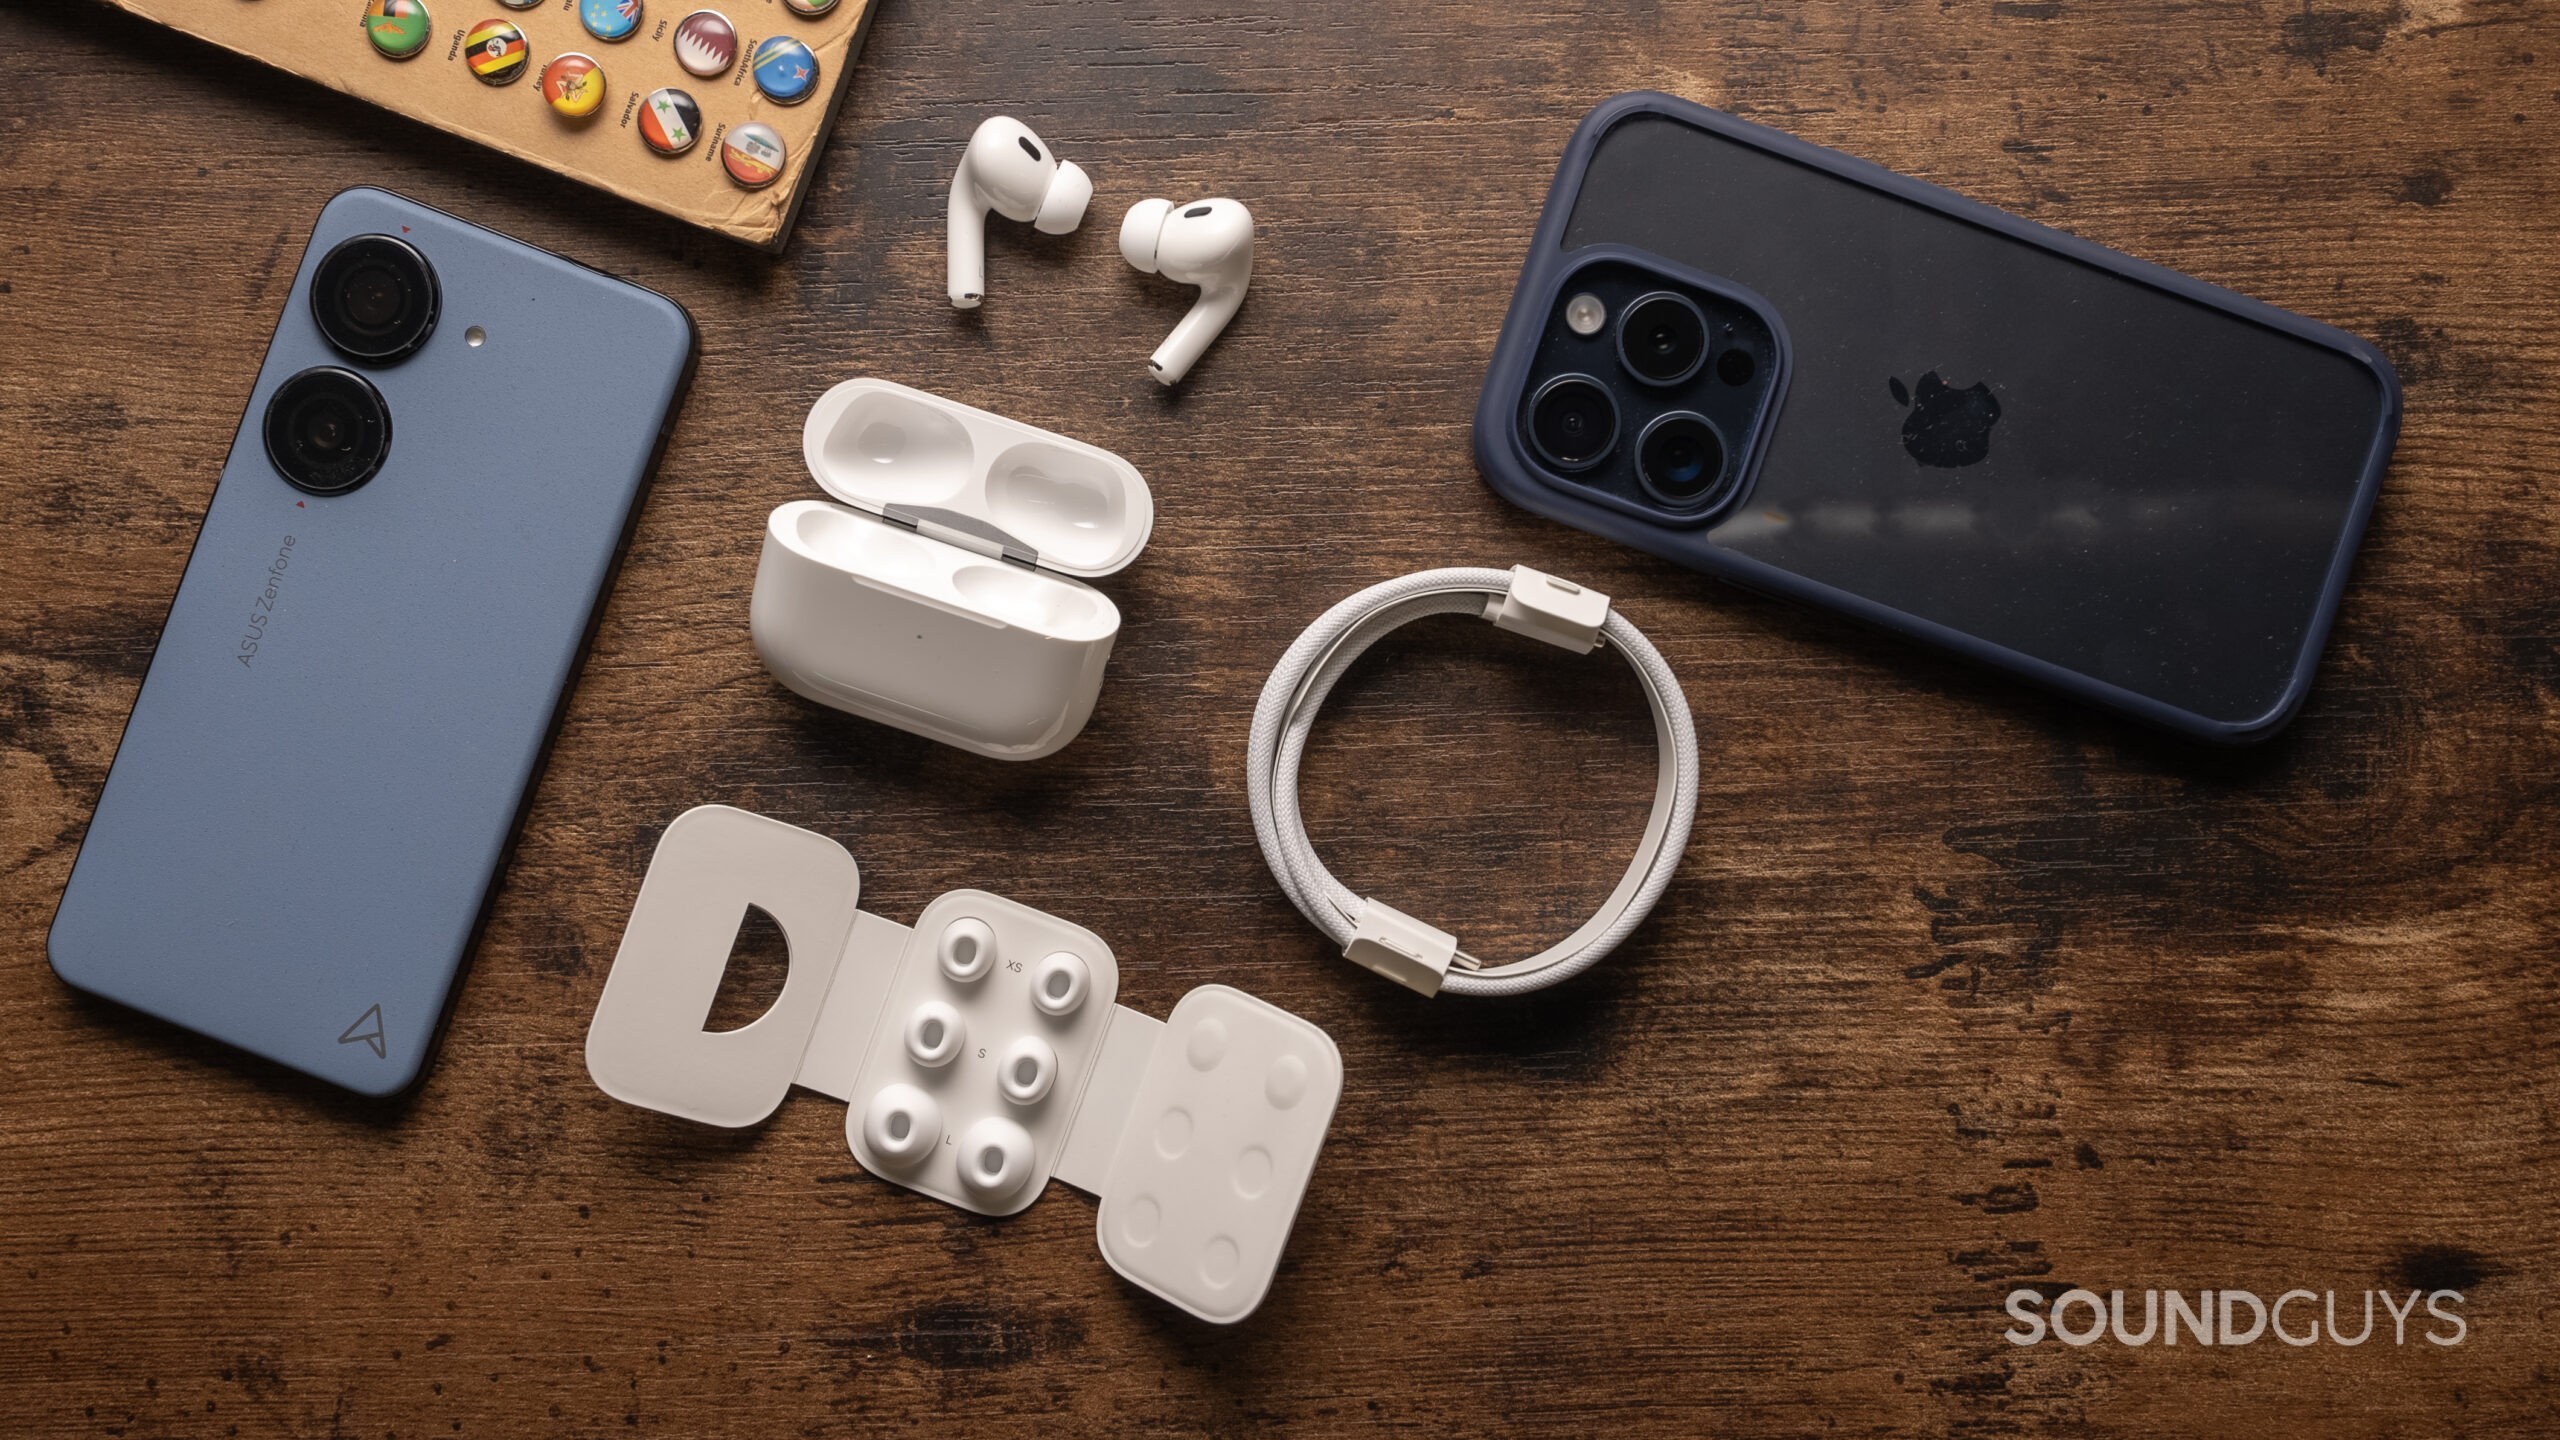 The Apple AirPods Pro (2nd Generation) comes with ear tips, a USB cable, and a charging case.